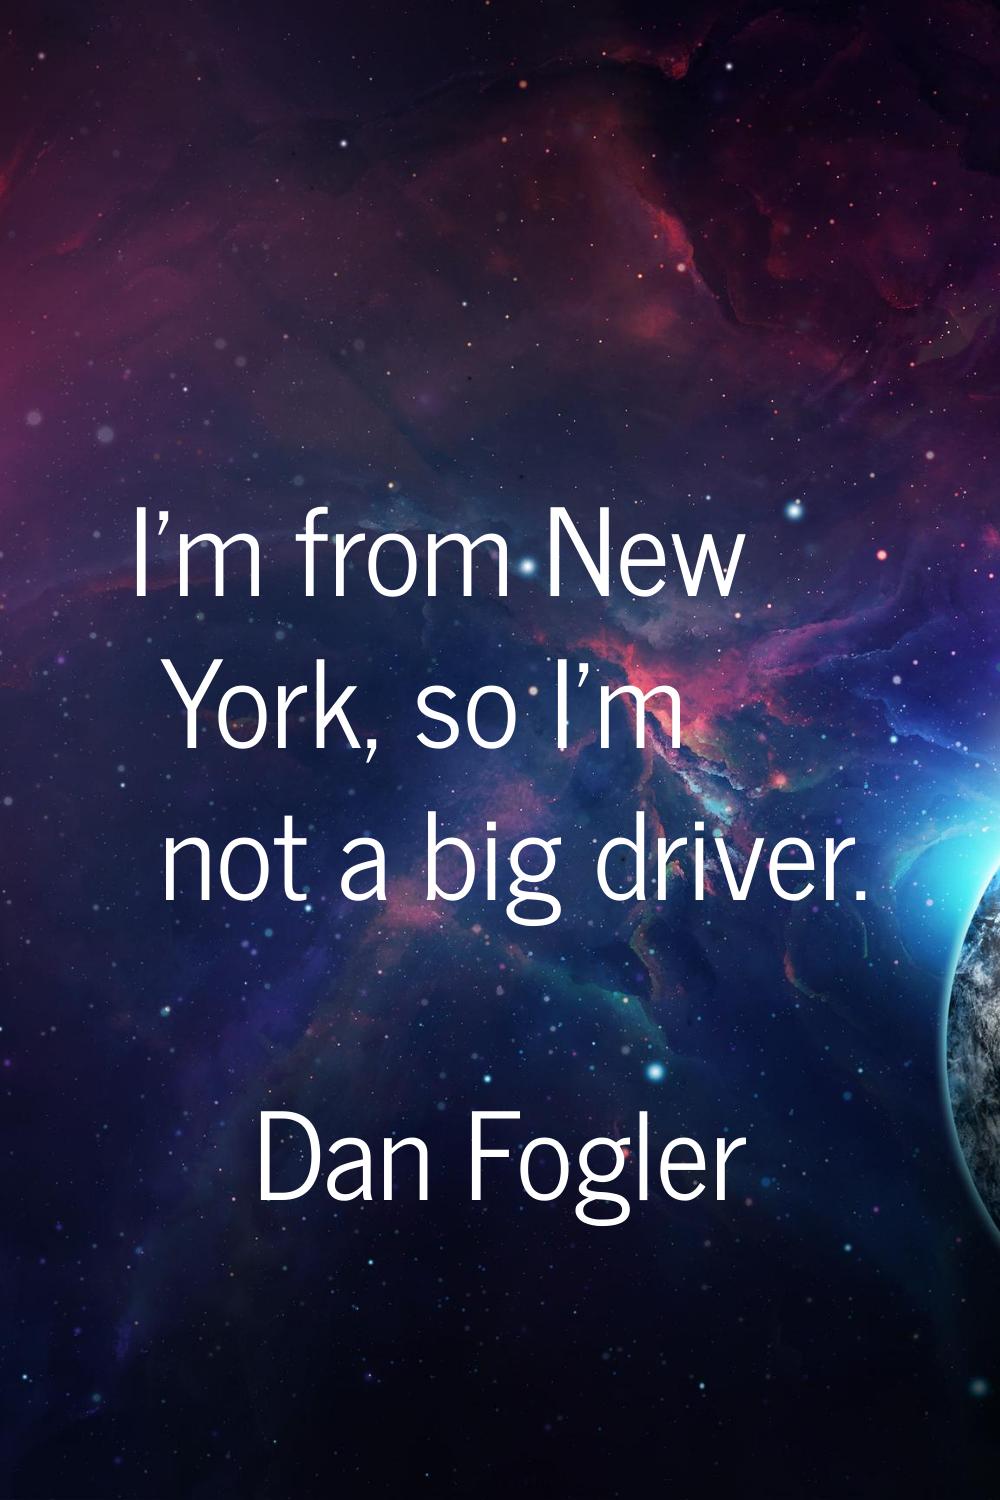 I'm from New York, so I'm not a big driver.